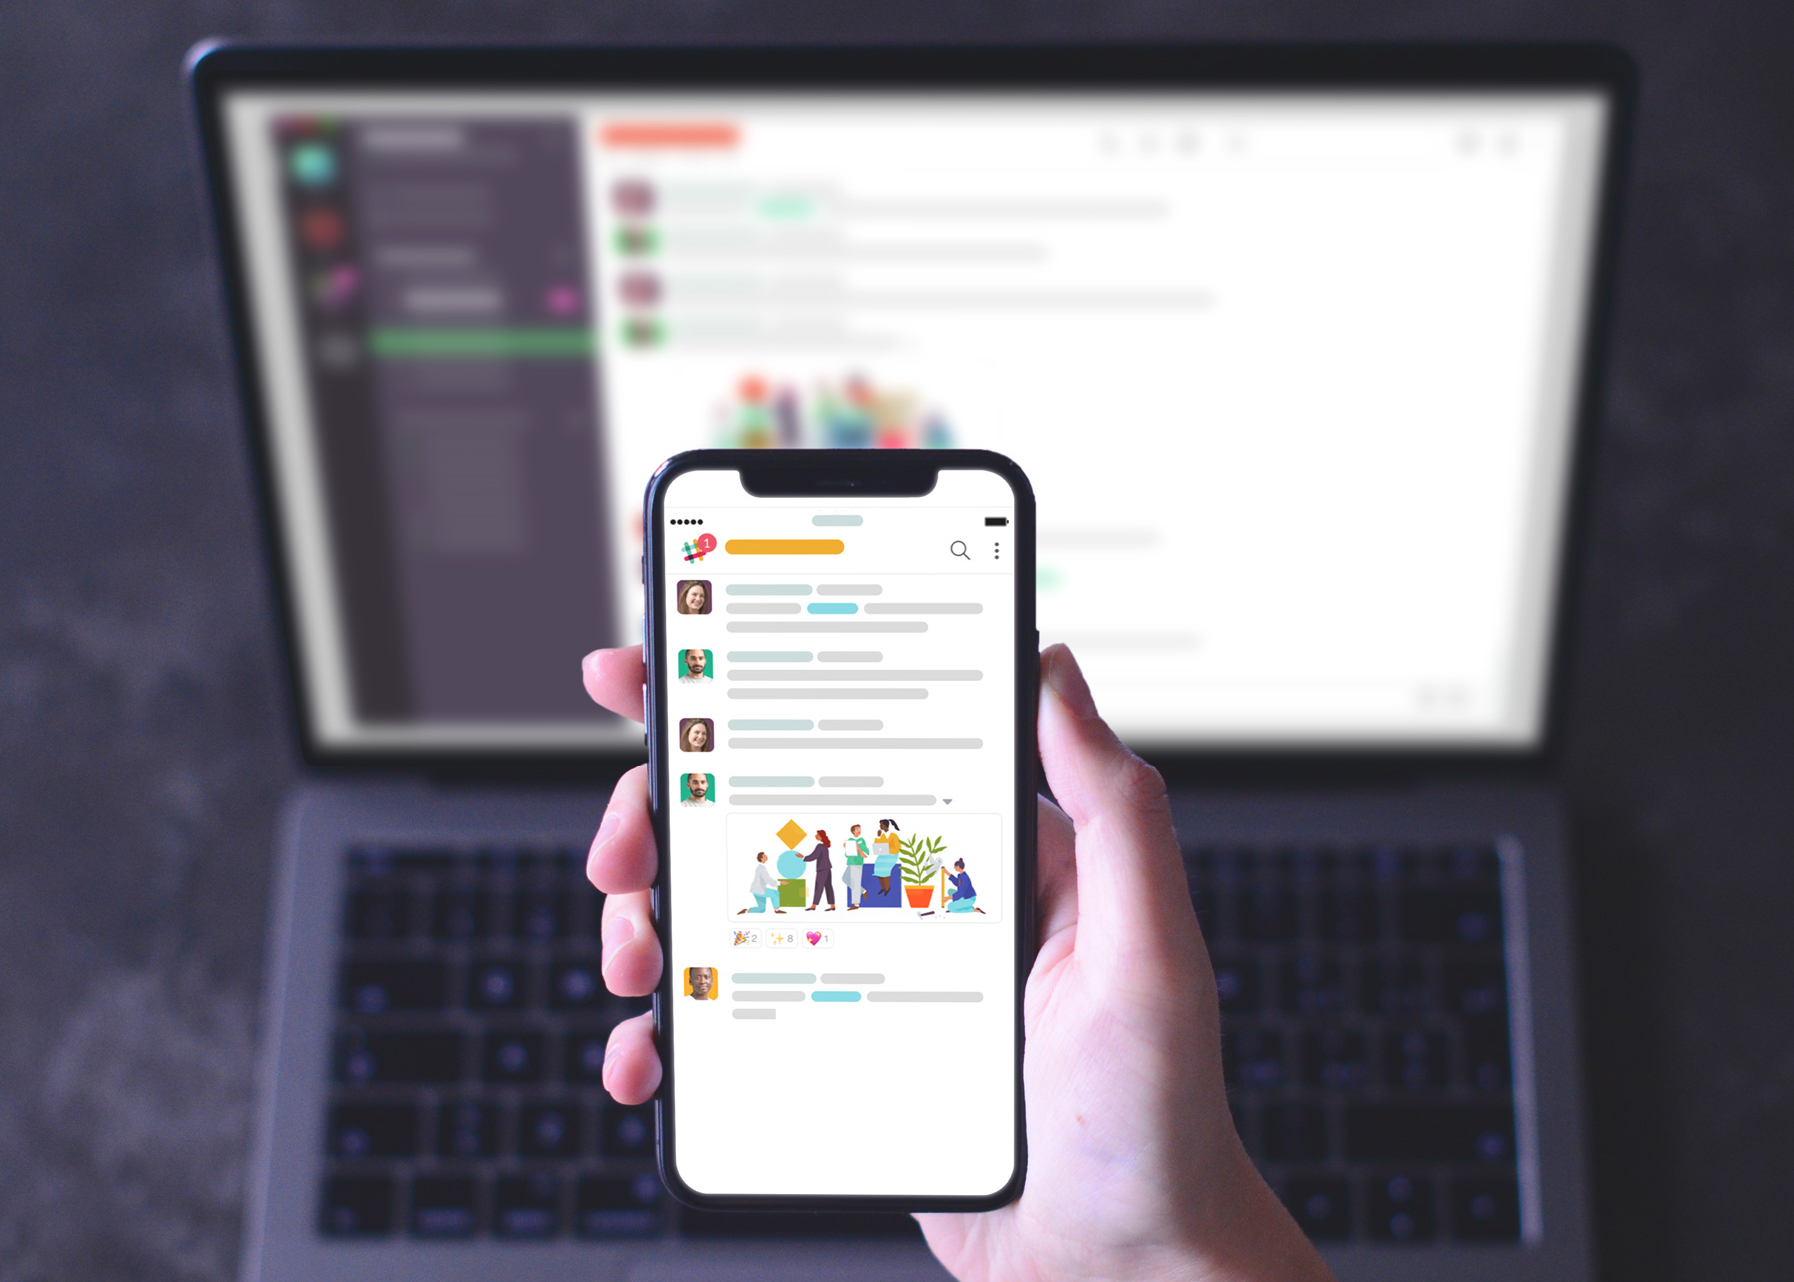 Stock photo of Slack being used on laptop and phone